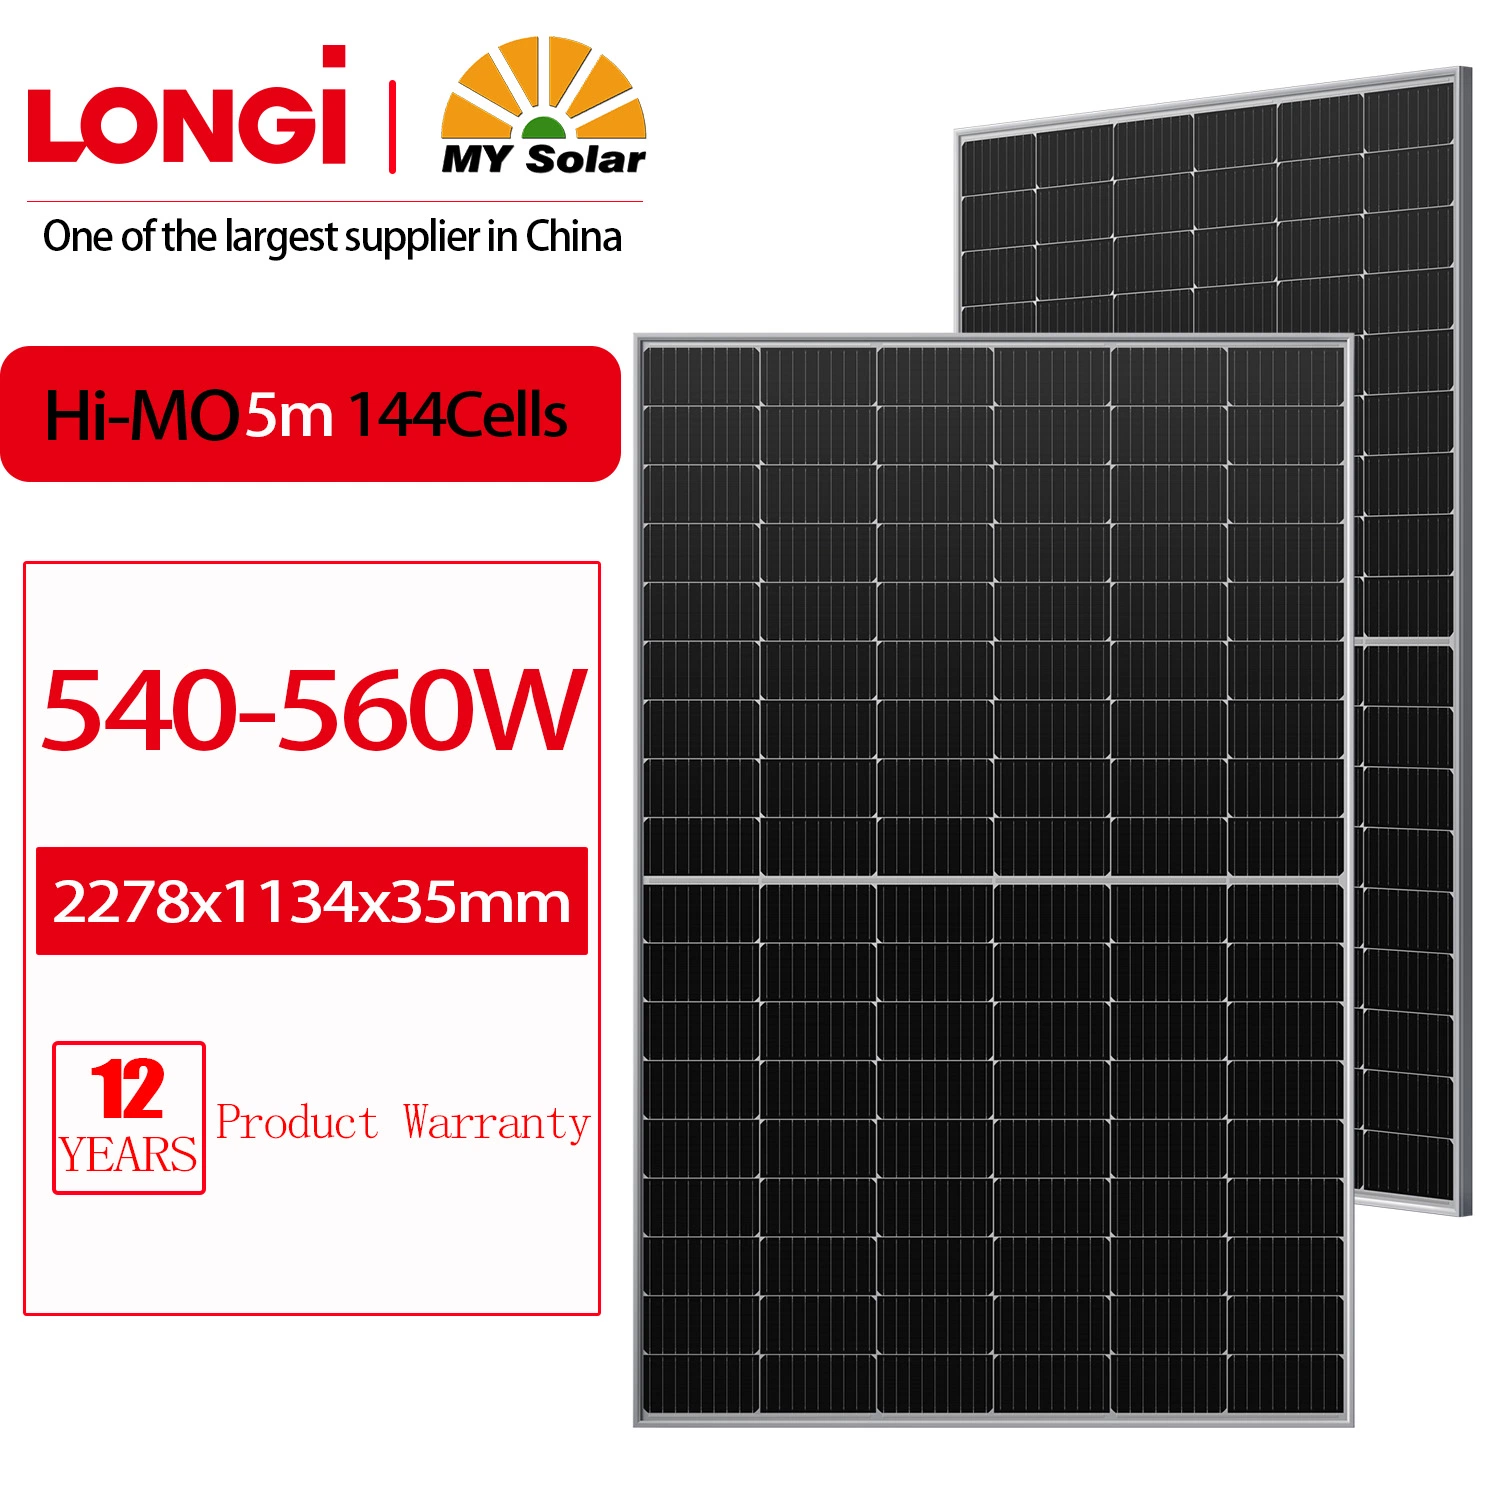 Longi/Mysolar Hi-Mo5m Lr5-72hph 540W 545W 550W 555W 560W Solar Panel for Home Power System